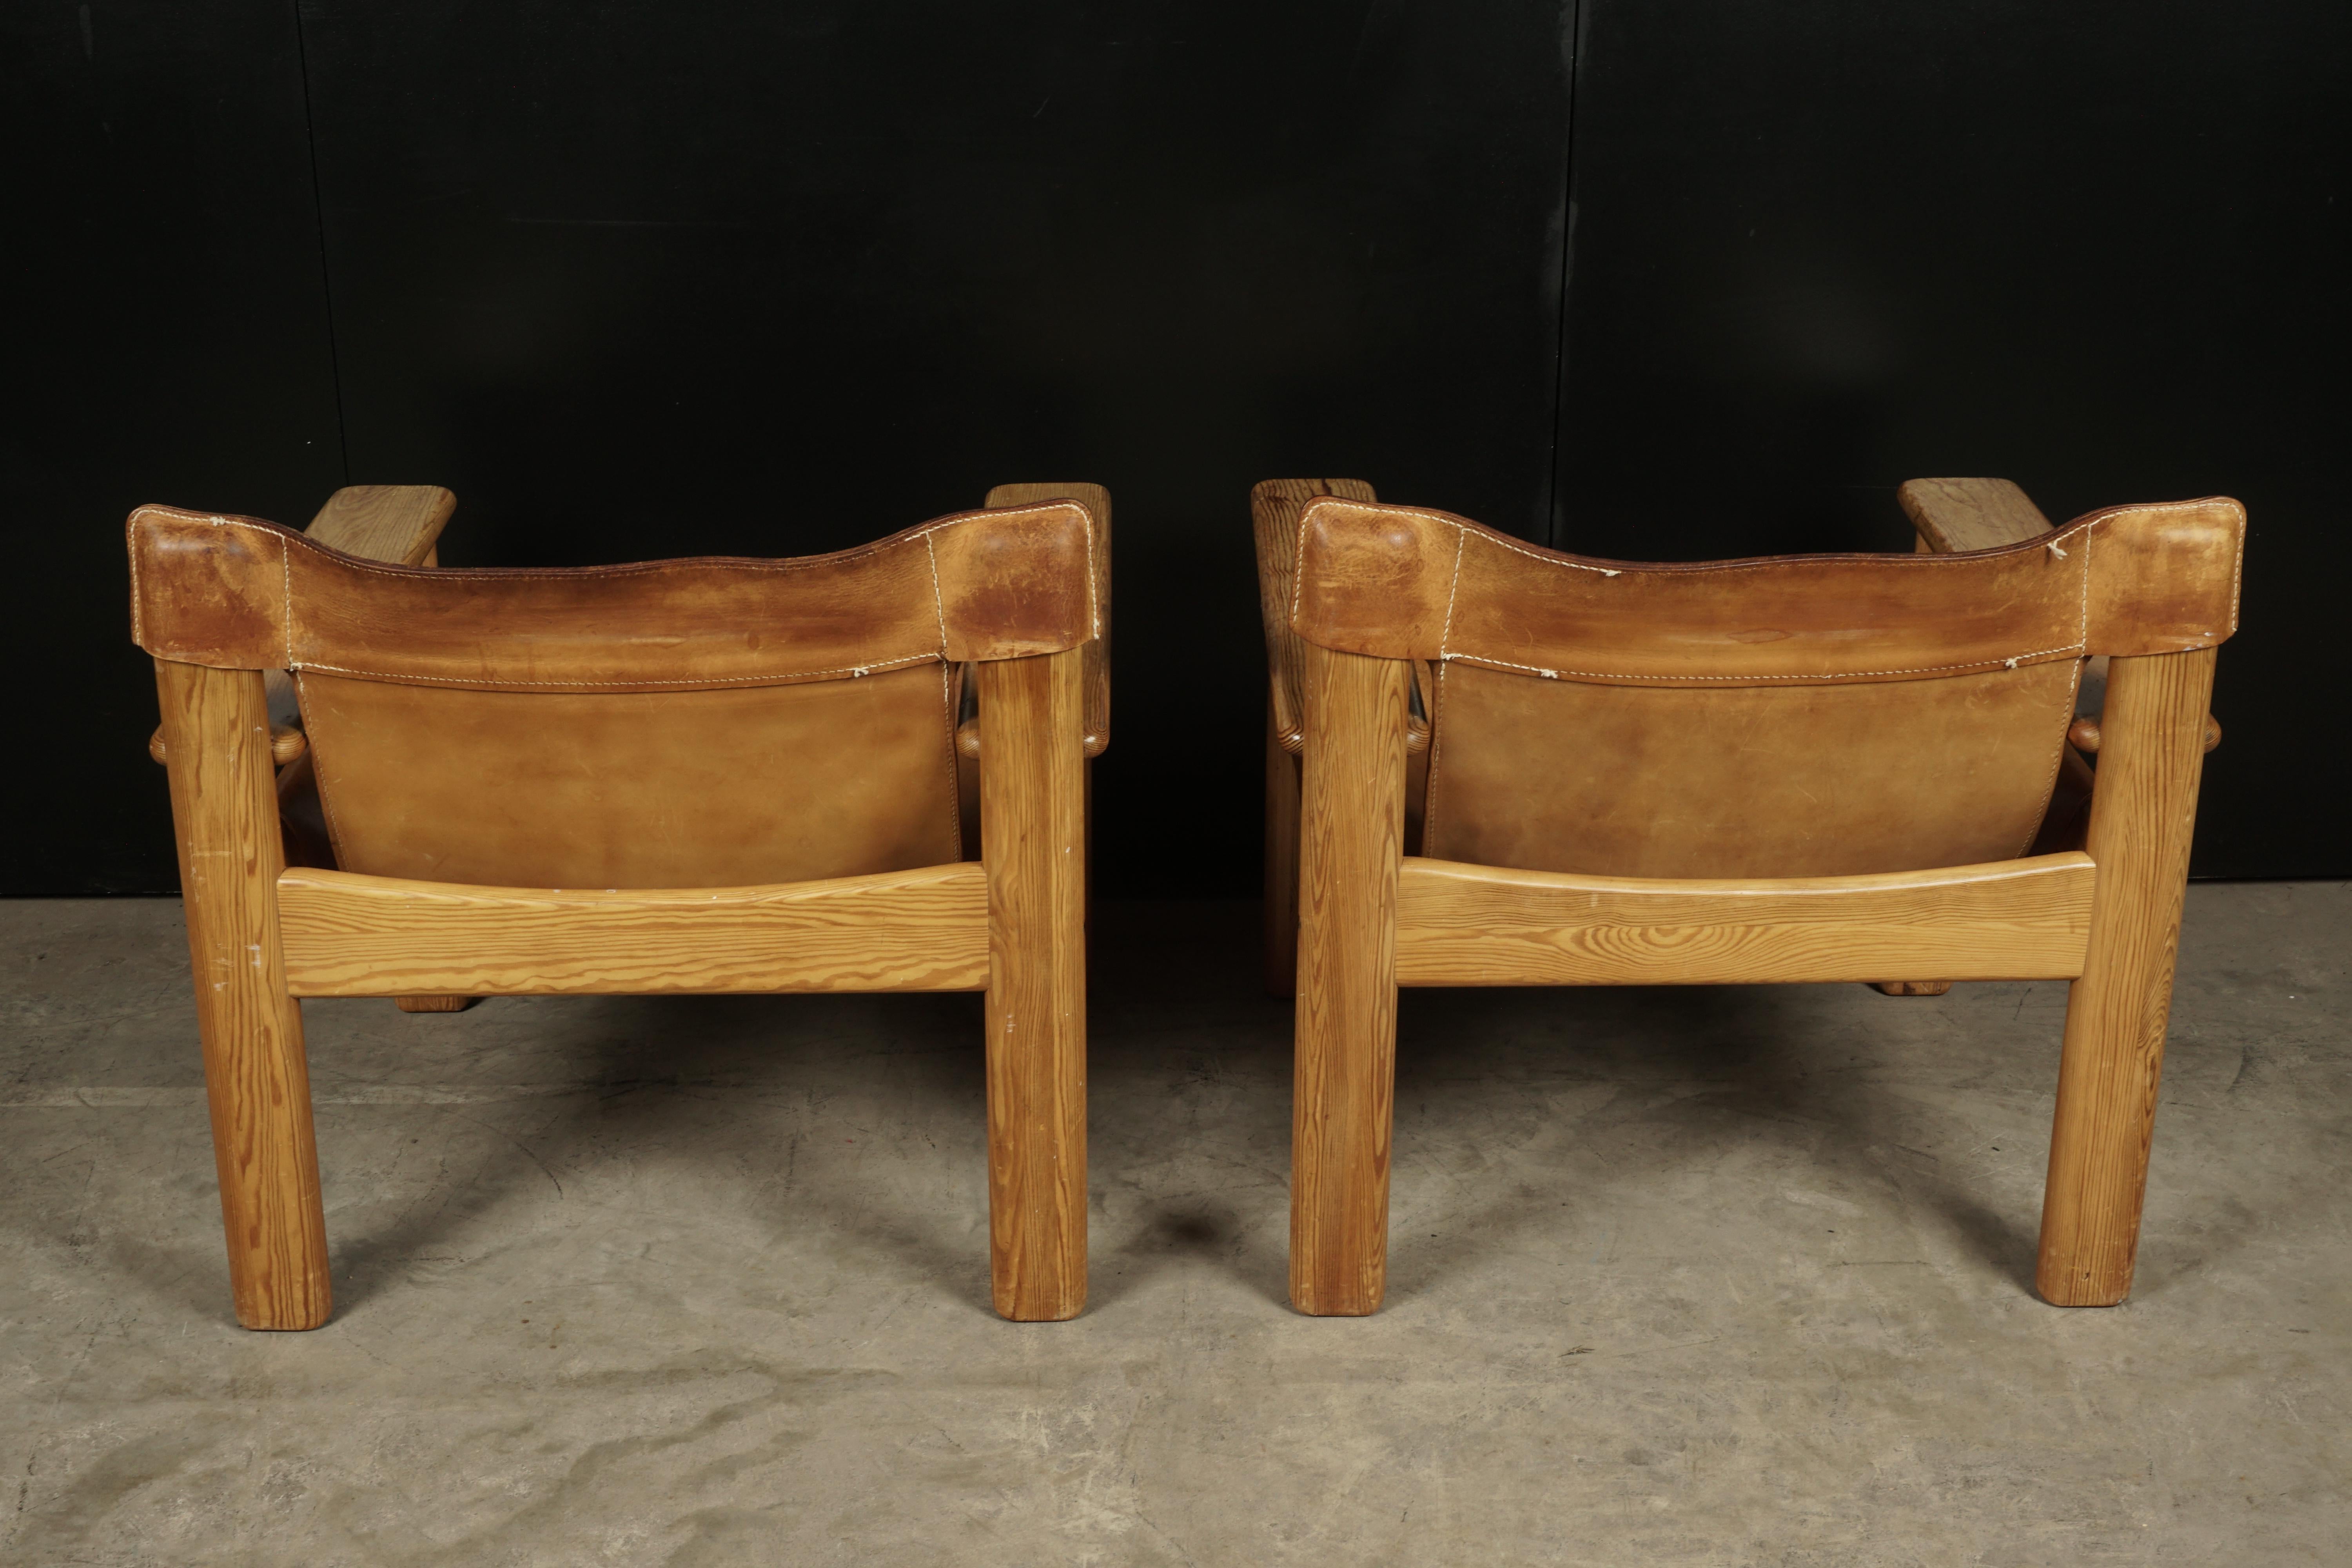 European Midcentury Pair of Spanish Style Chairs from Sweden, circa 1970